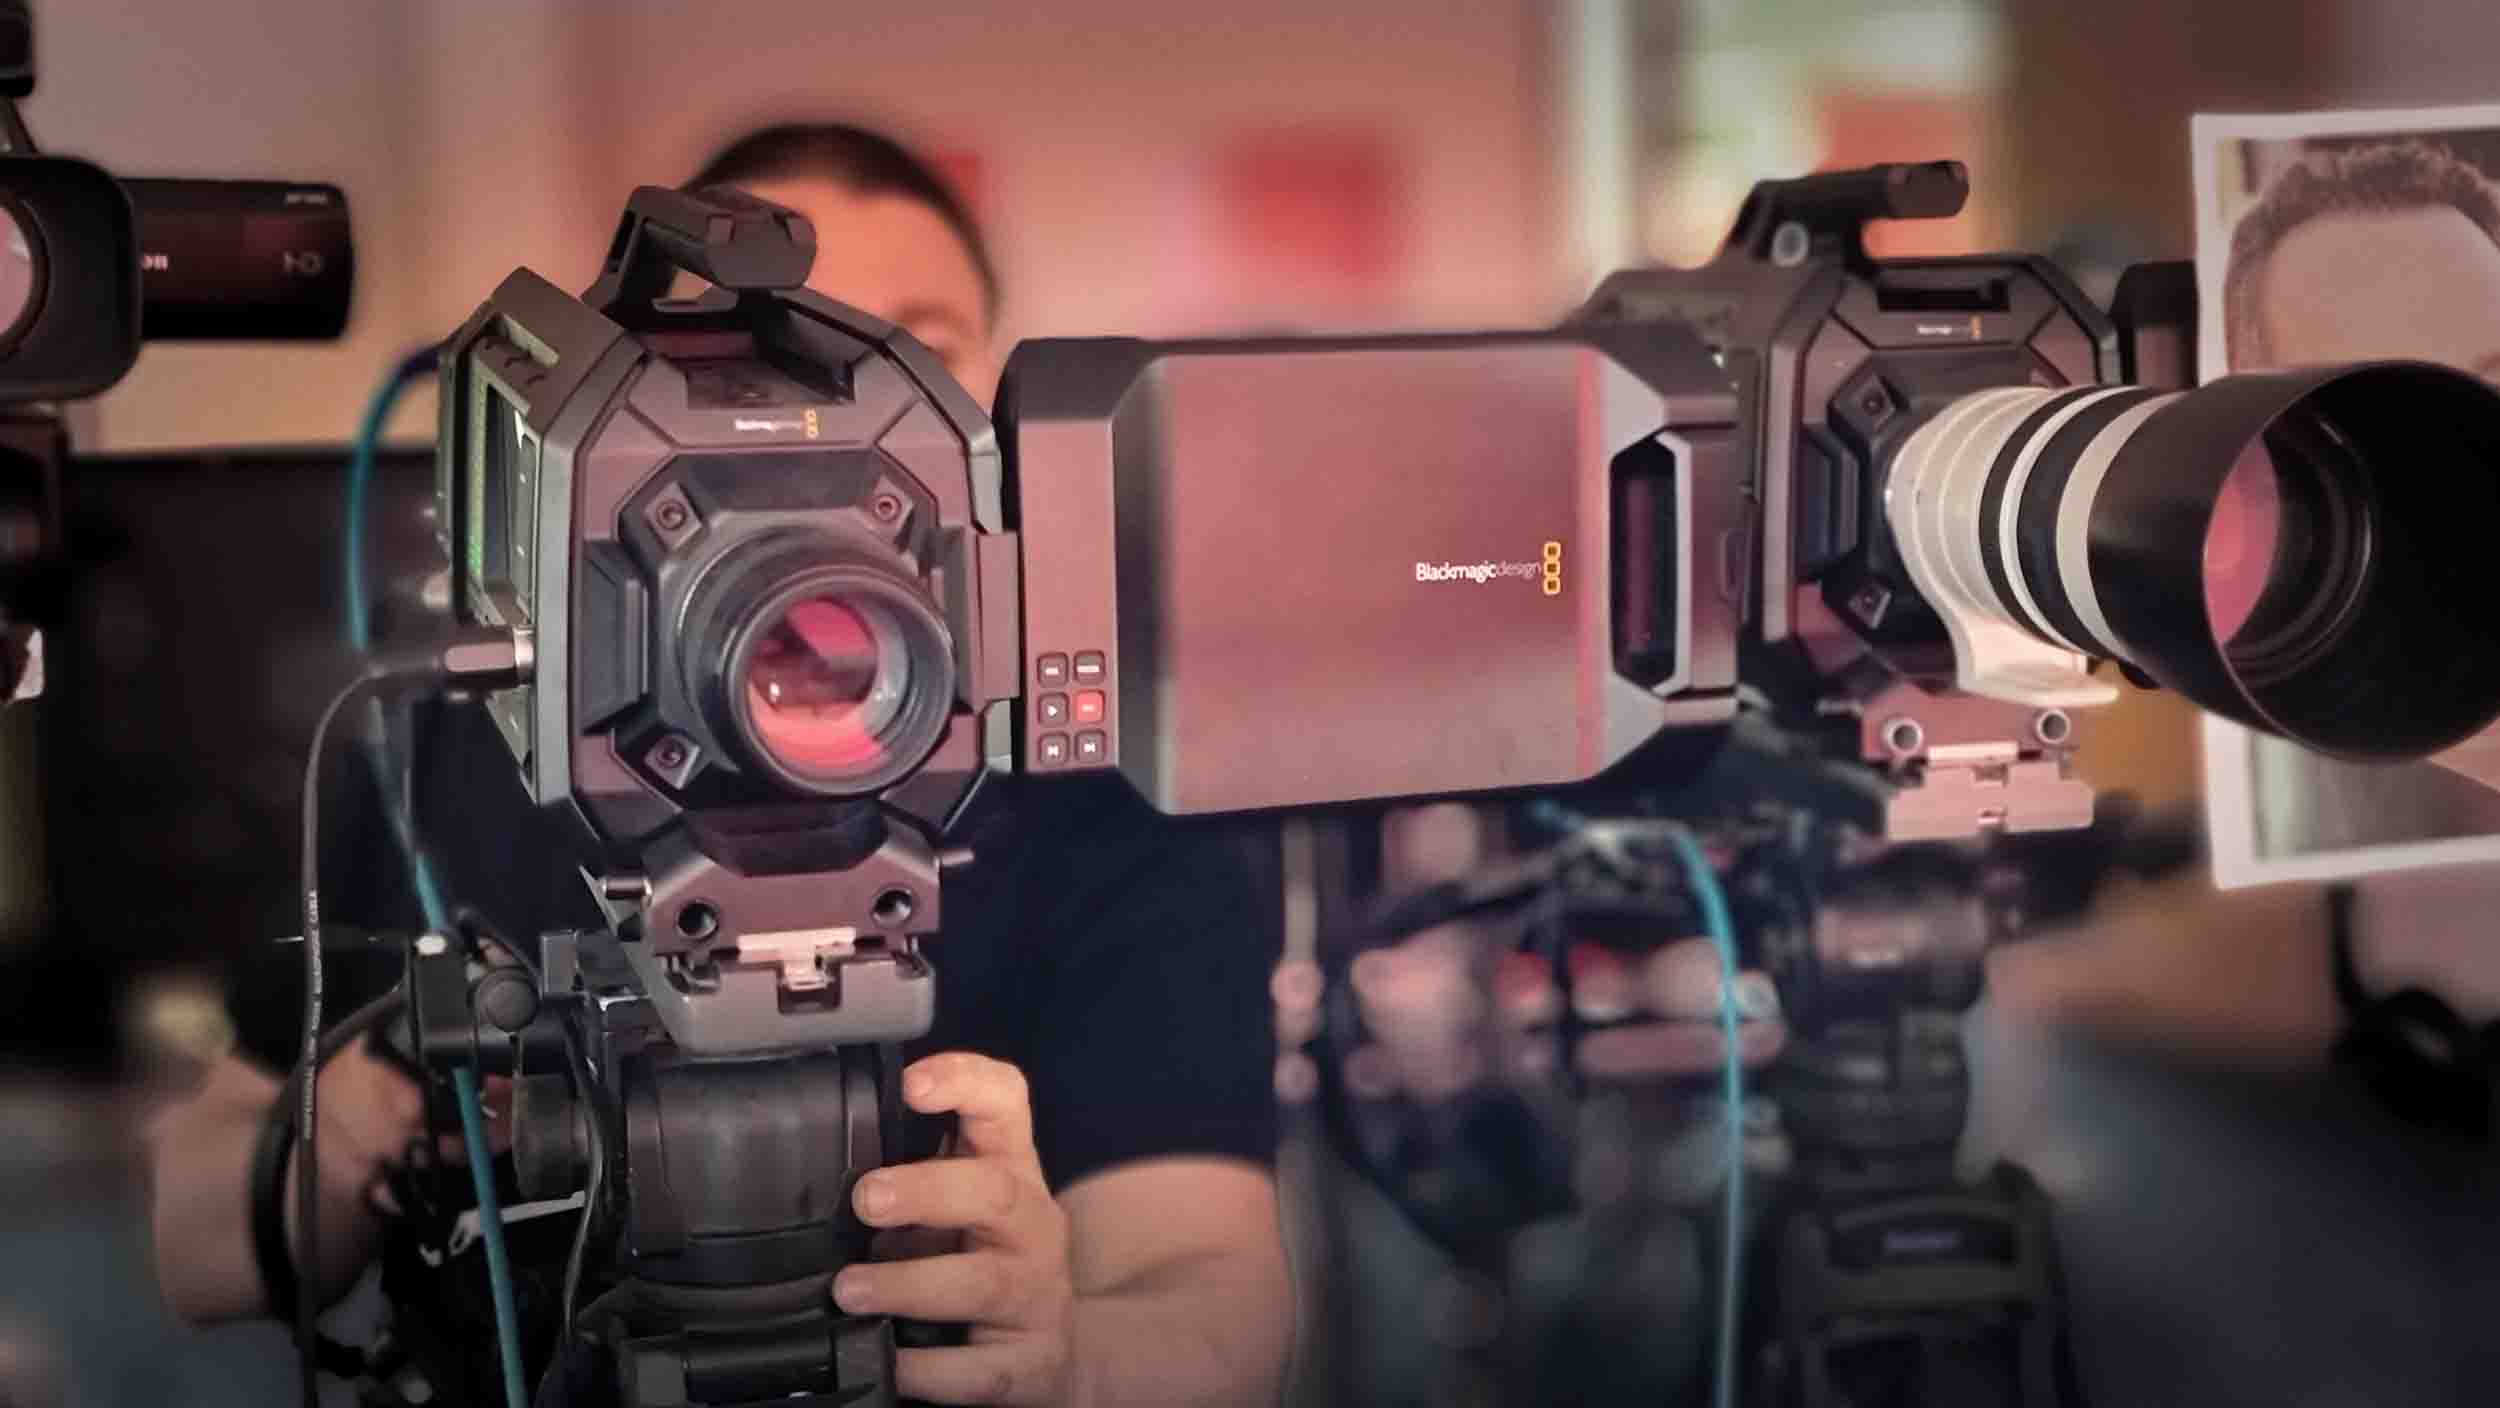 A photograph of professional video production cameras.